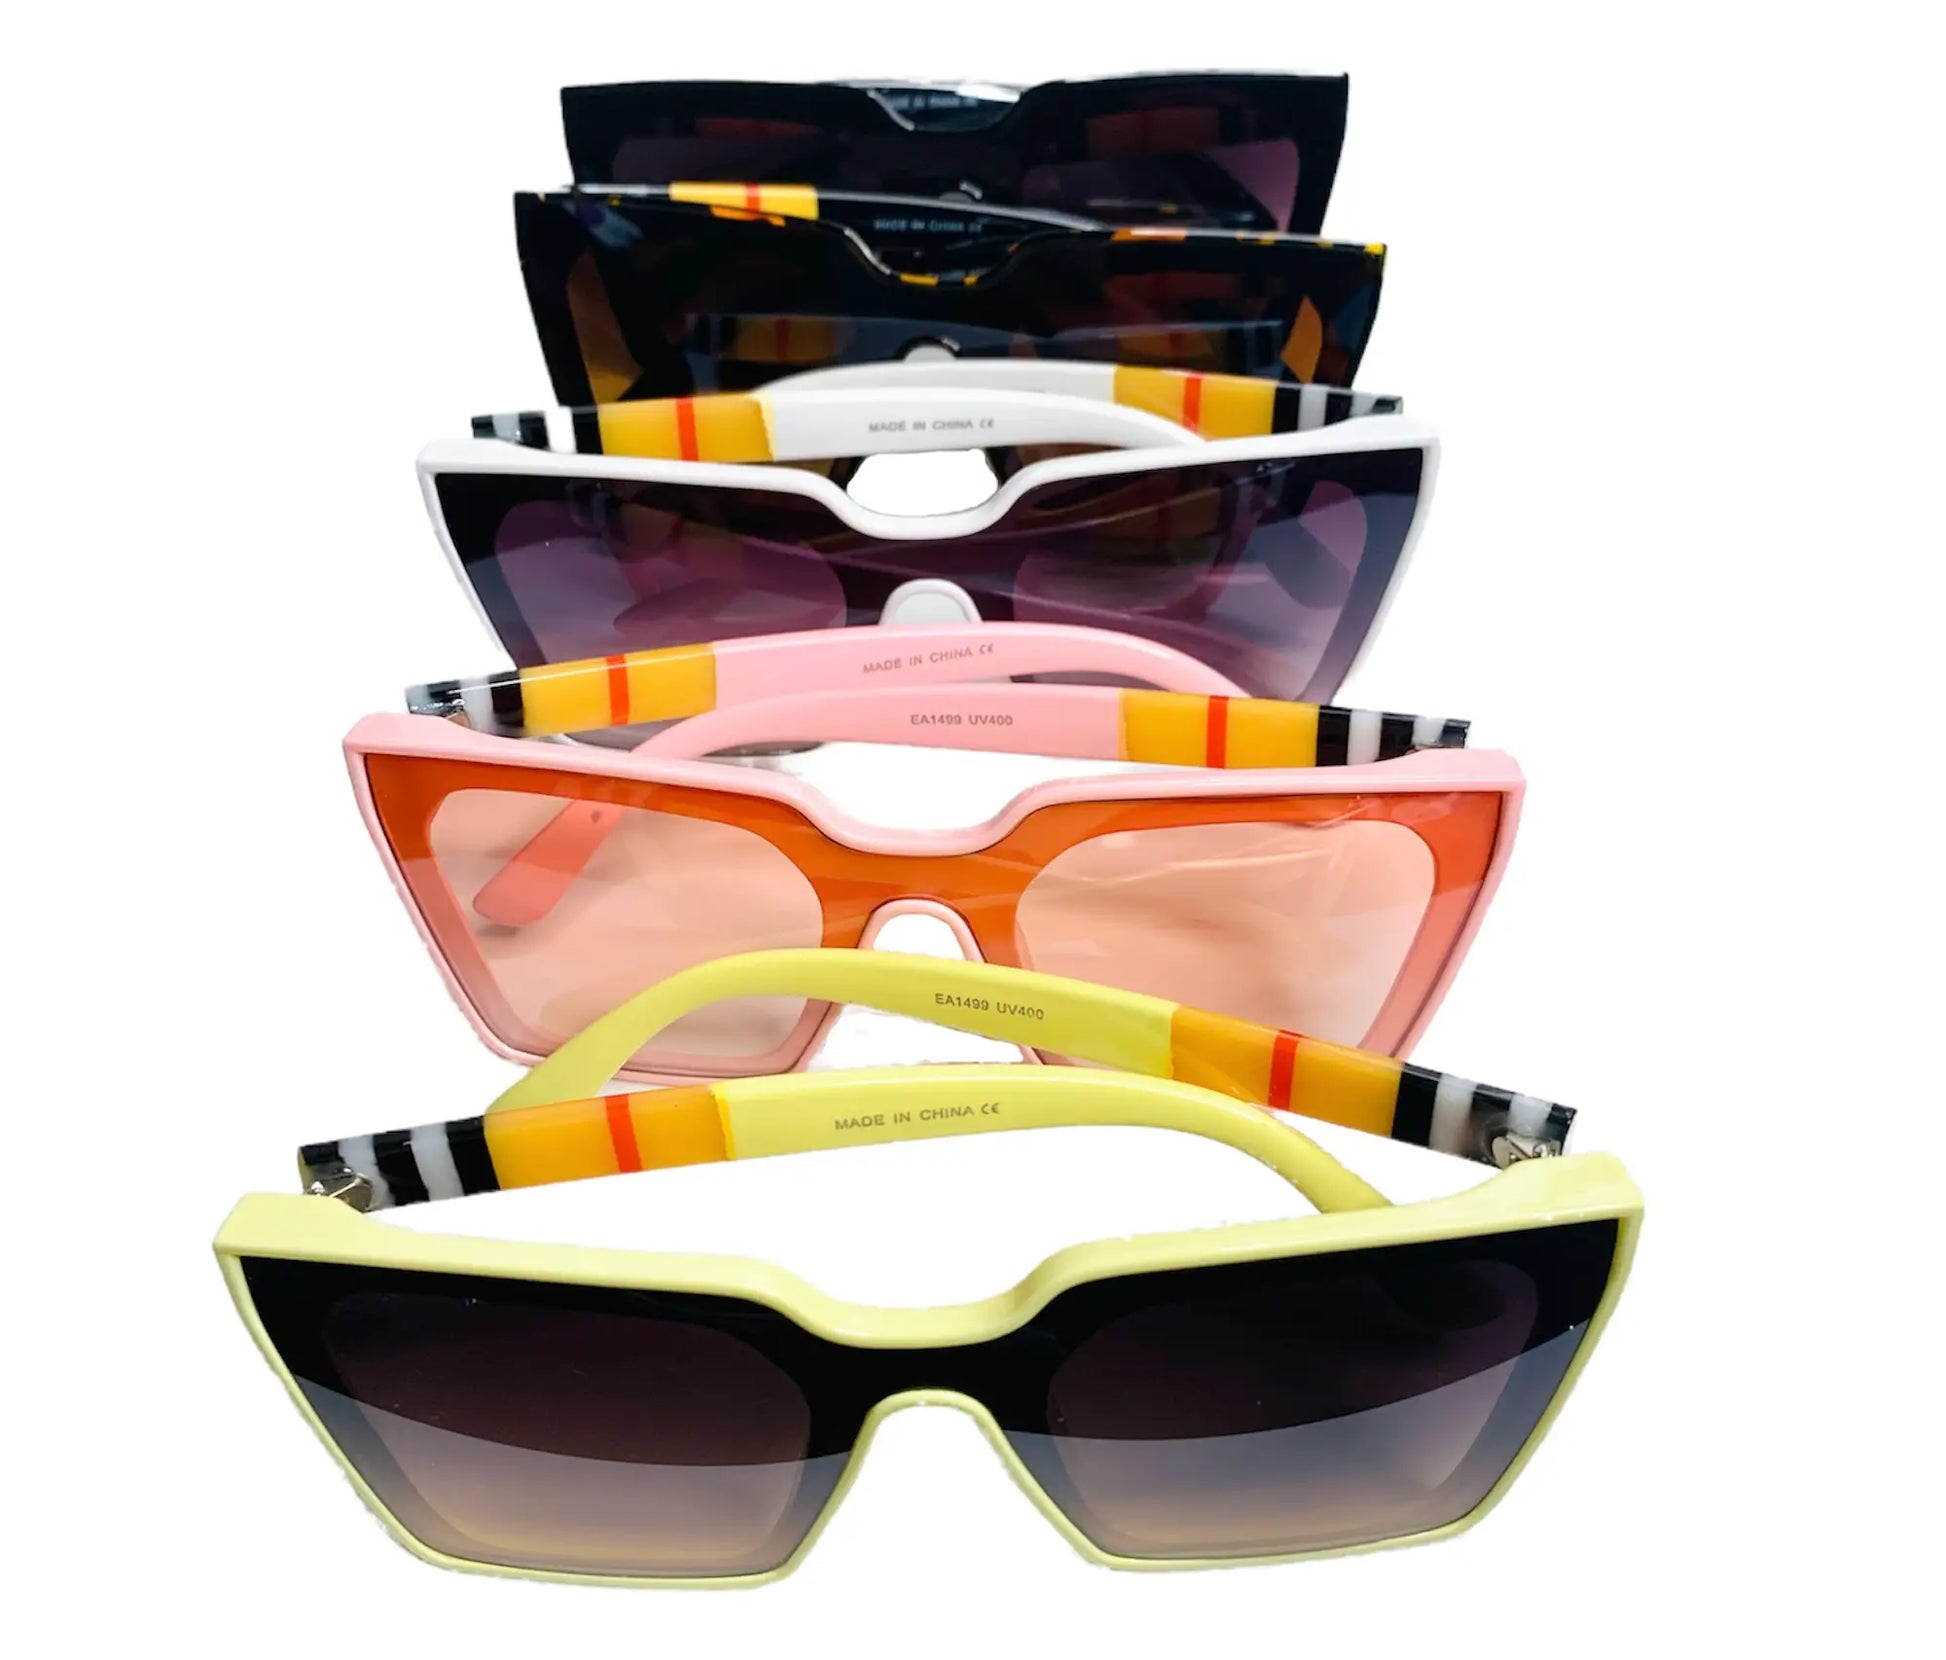 Herberry Sunnies Curvy Pineapple Boutique